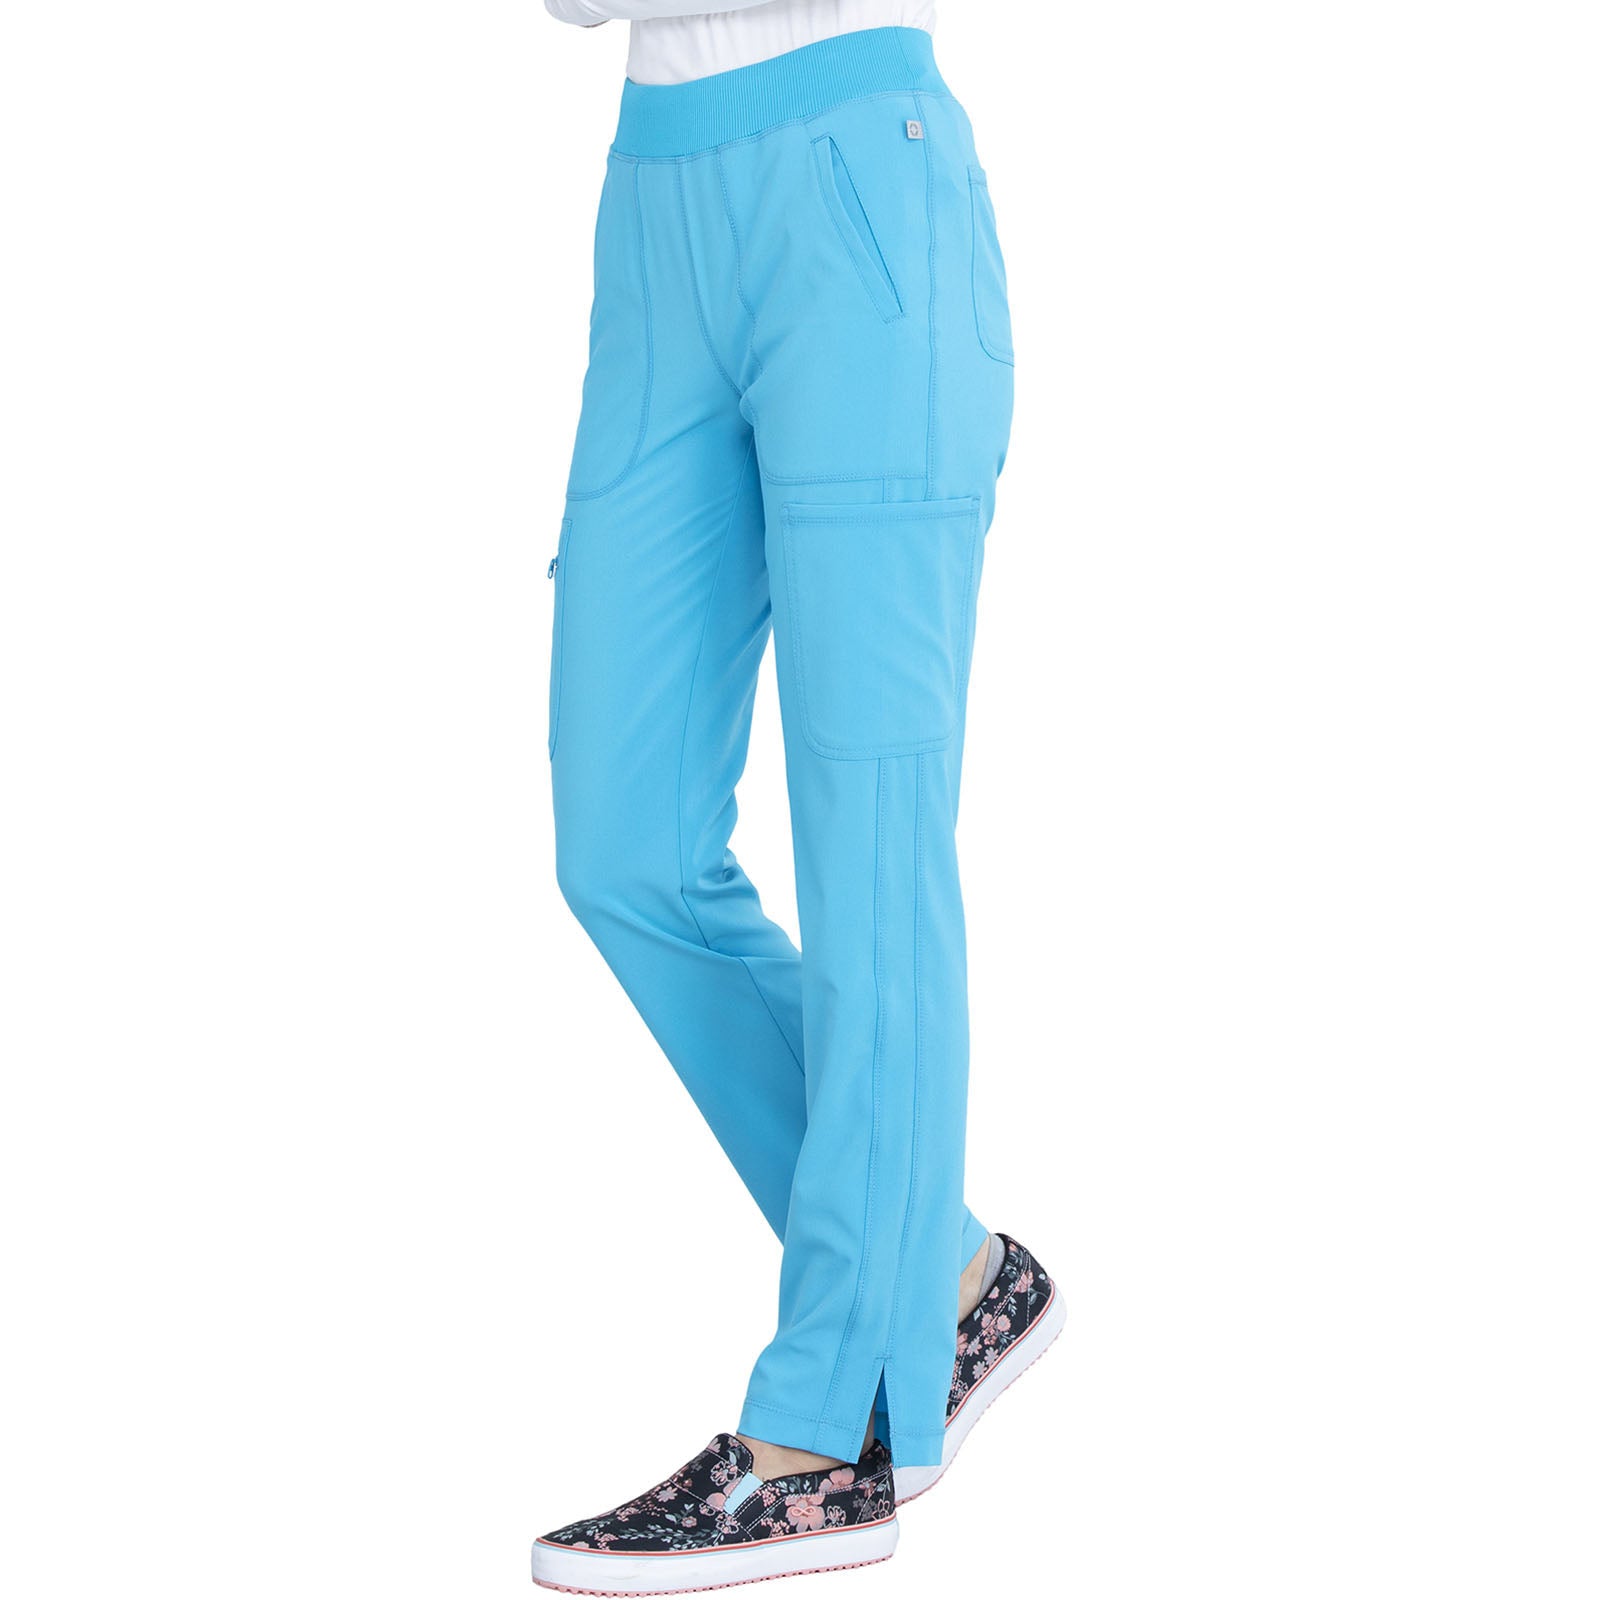 Women's Scrub Pant Mid Rise Tapered Leg Pull-on by Cherokee CK065 SALE